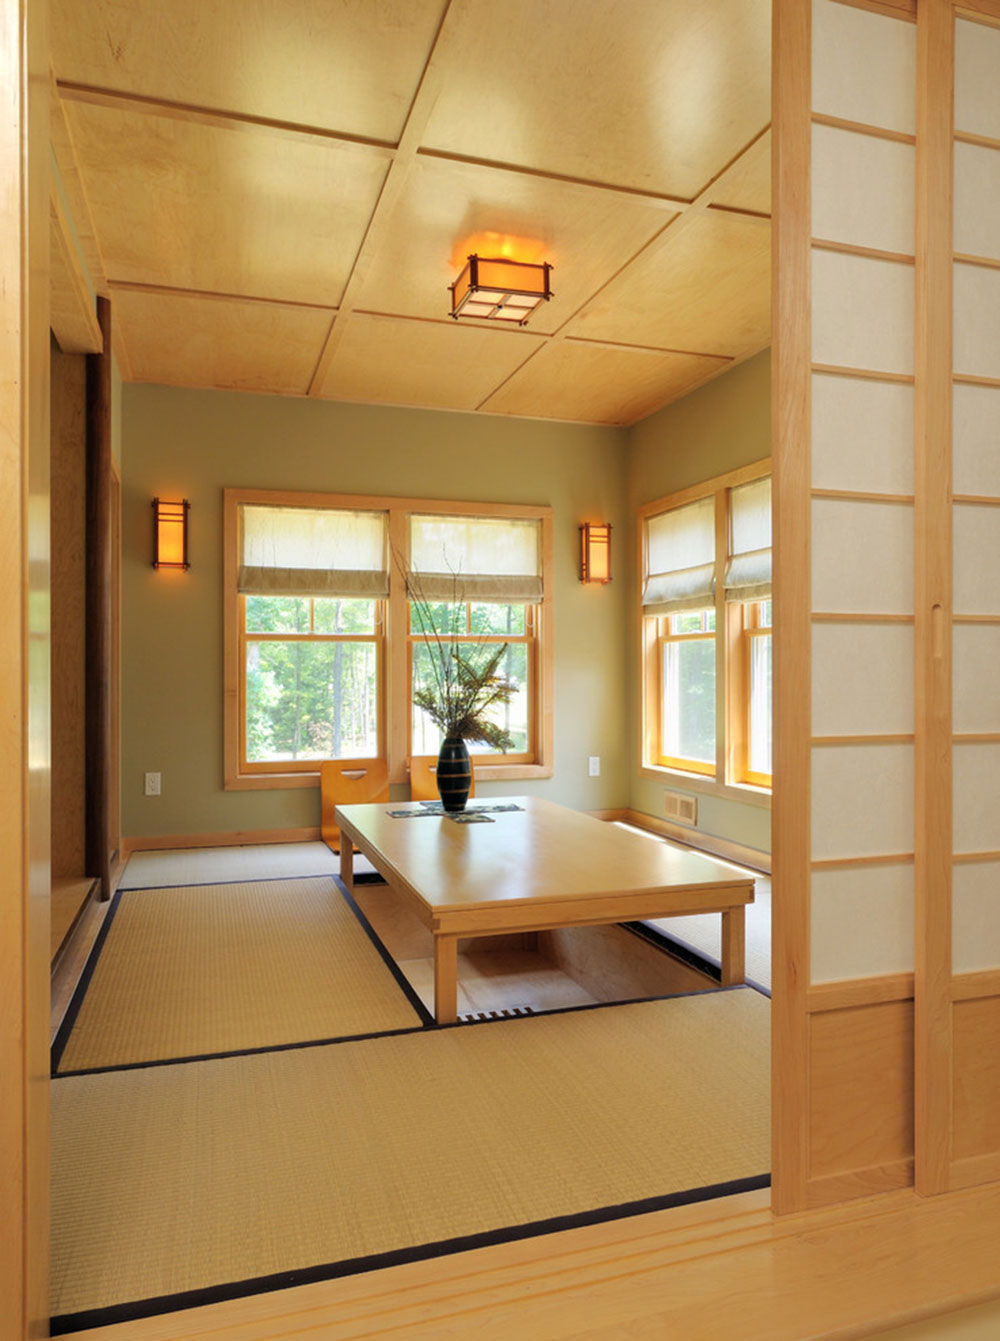 Ridge-View-Residence-by-Kuhn-Riddle-Architects What a traditional Japanese living environment looks like